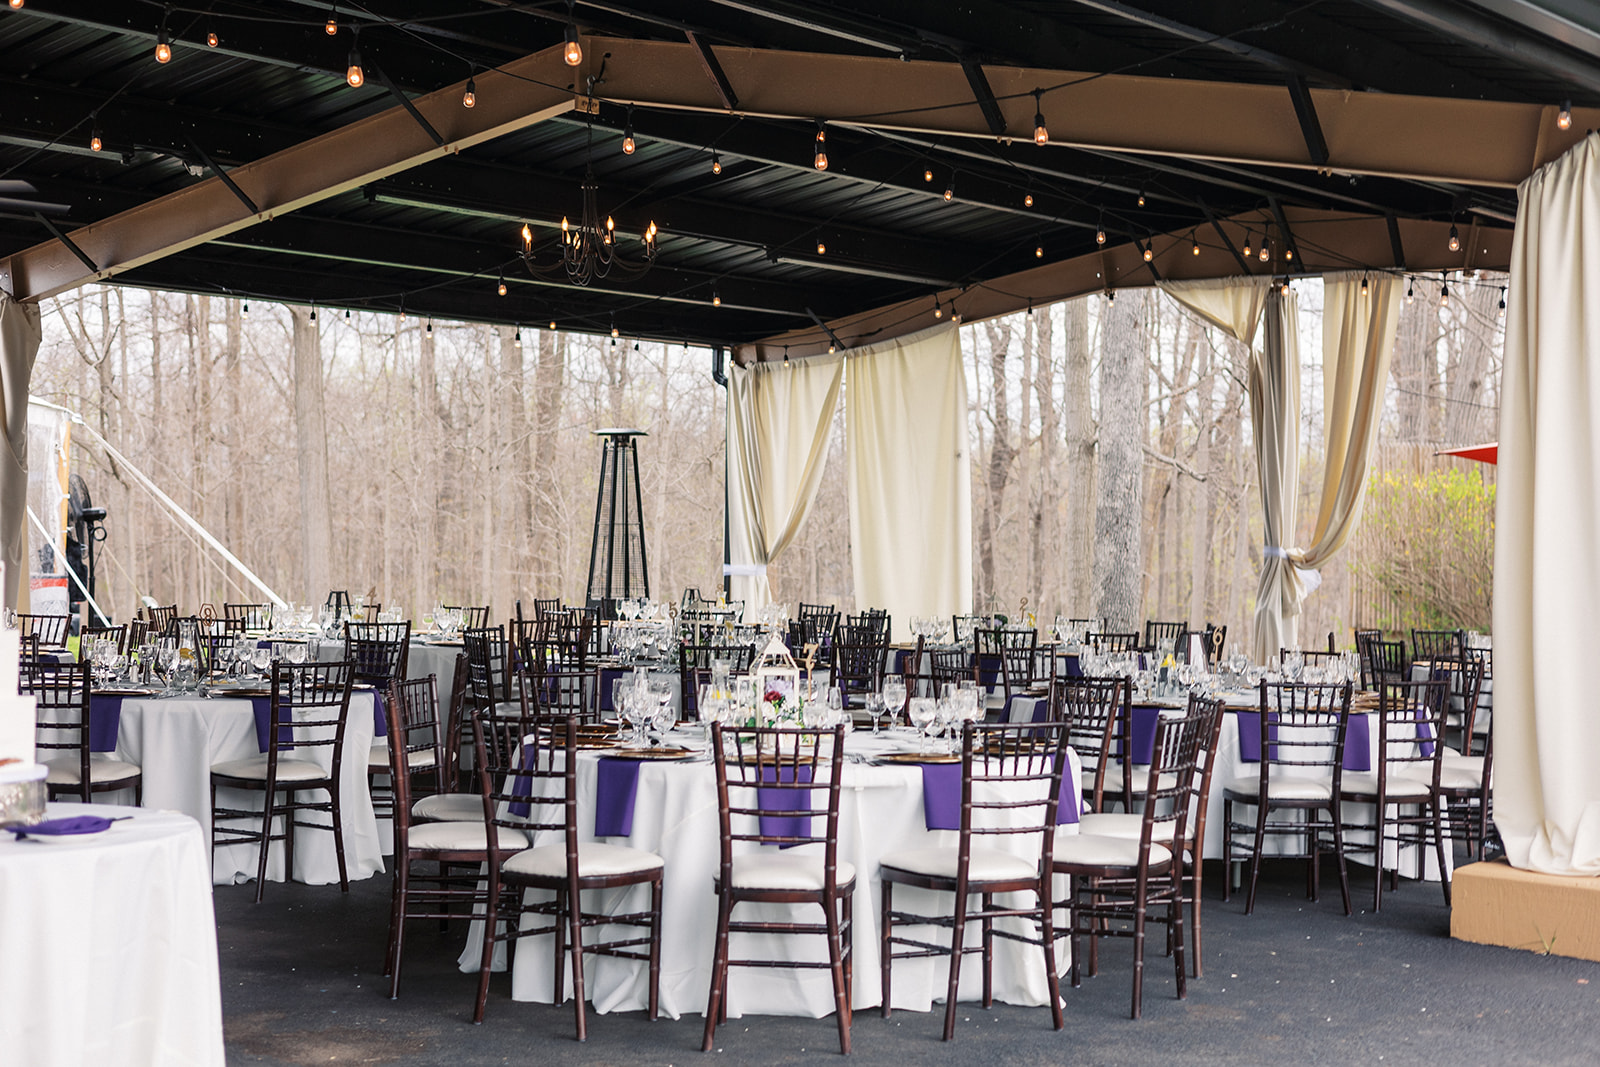 A Forest Lodge Wedding reception set up under an outdoor overhang with market lights and purple napkins